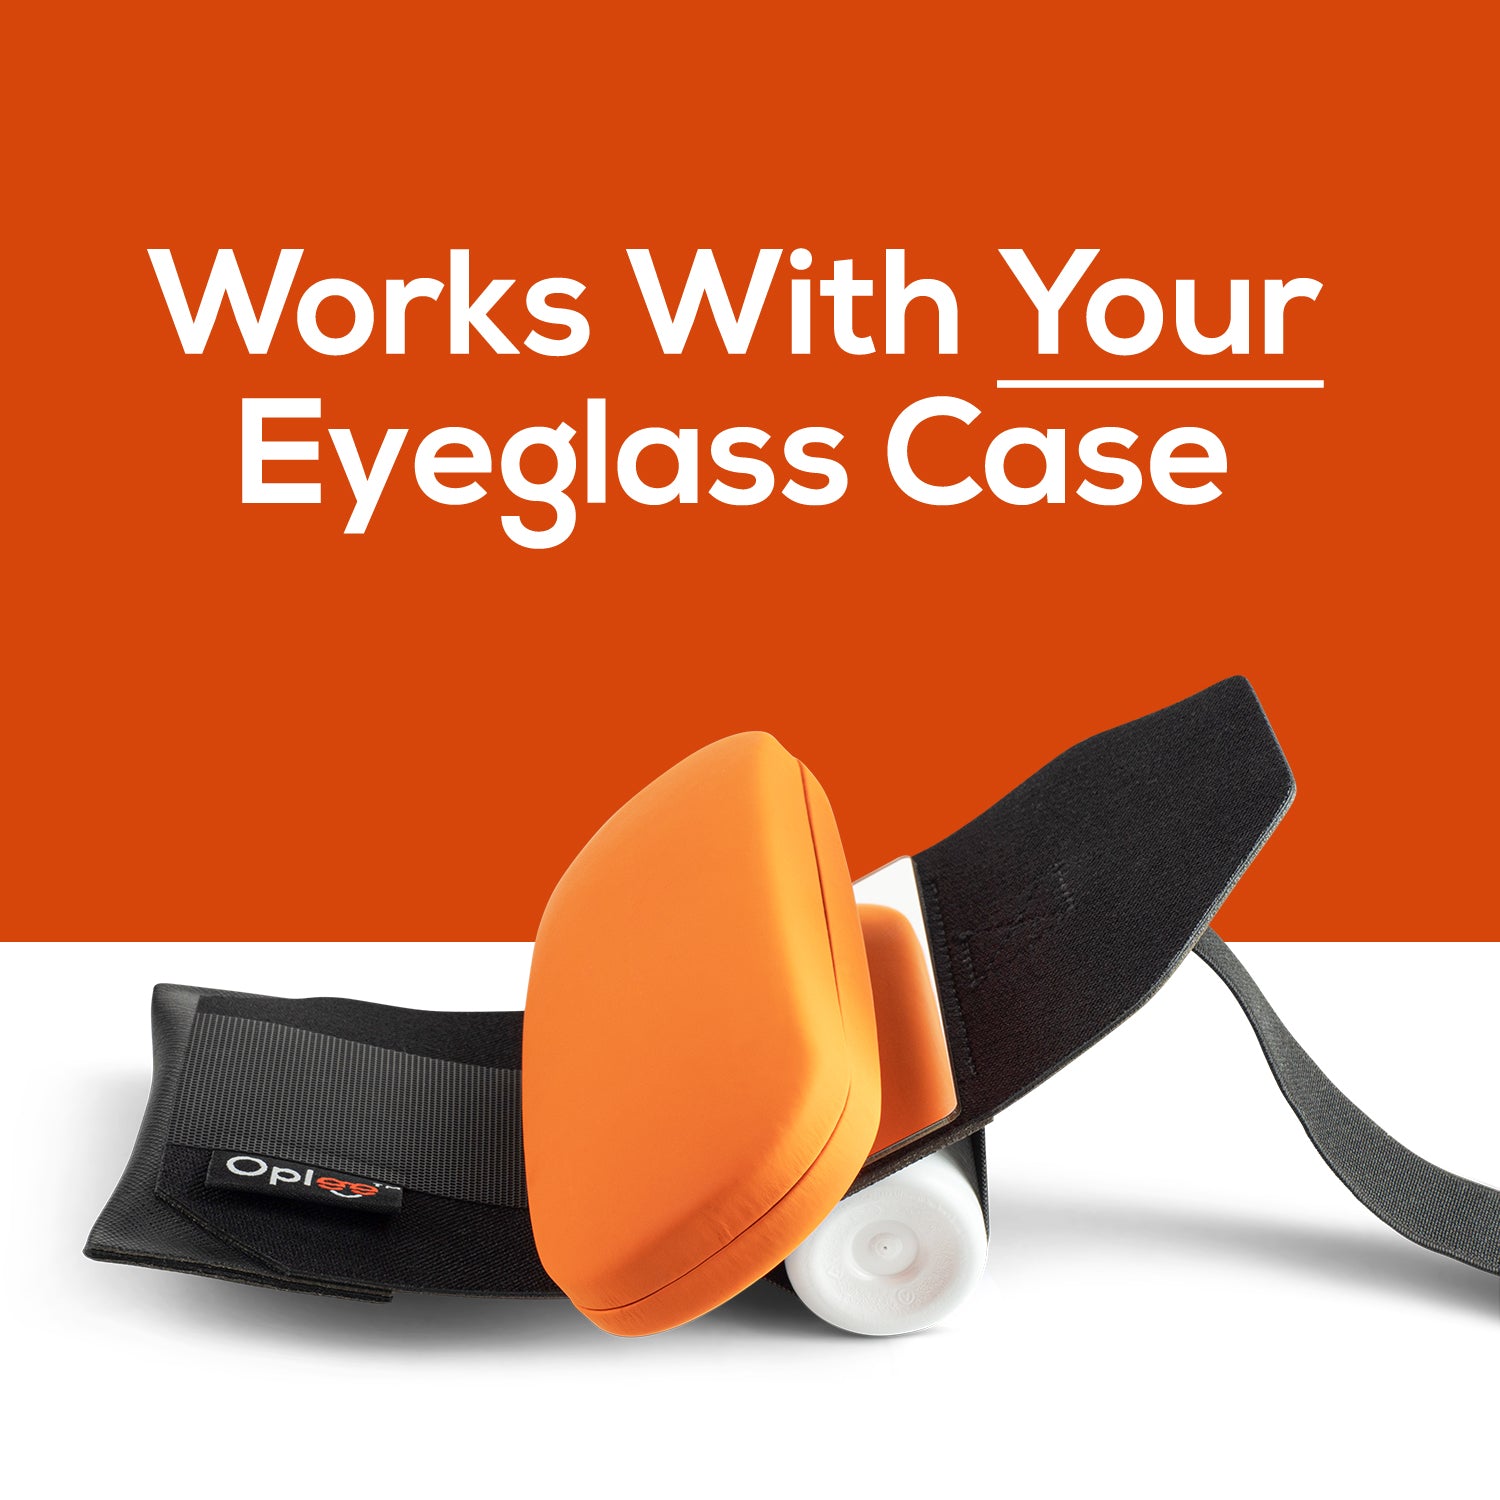 Load image into Gallery viewer, Oplee Travel Contact Lens Case - Works With YOUR Eyeglass Case